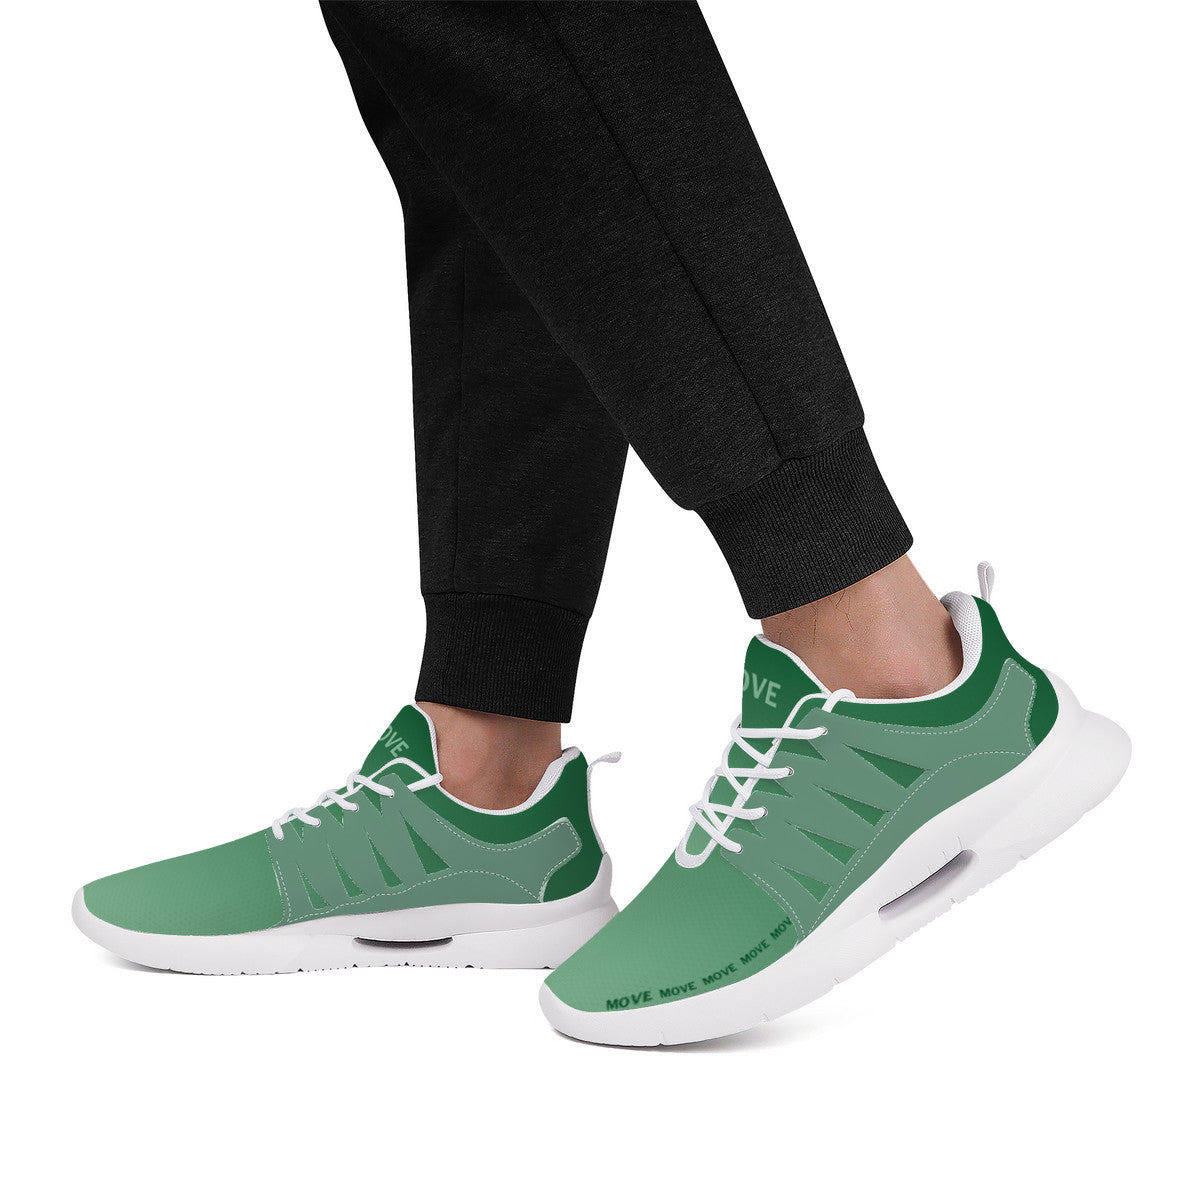 Workout Shoes - Move - Green